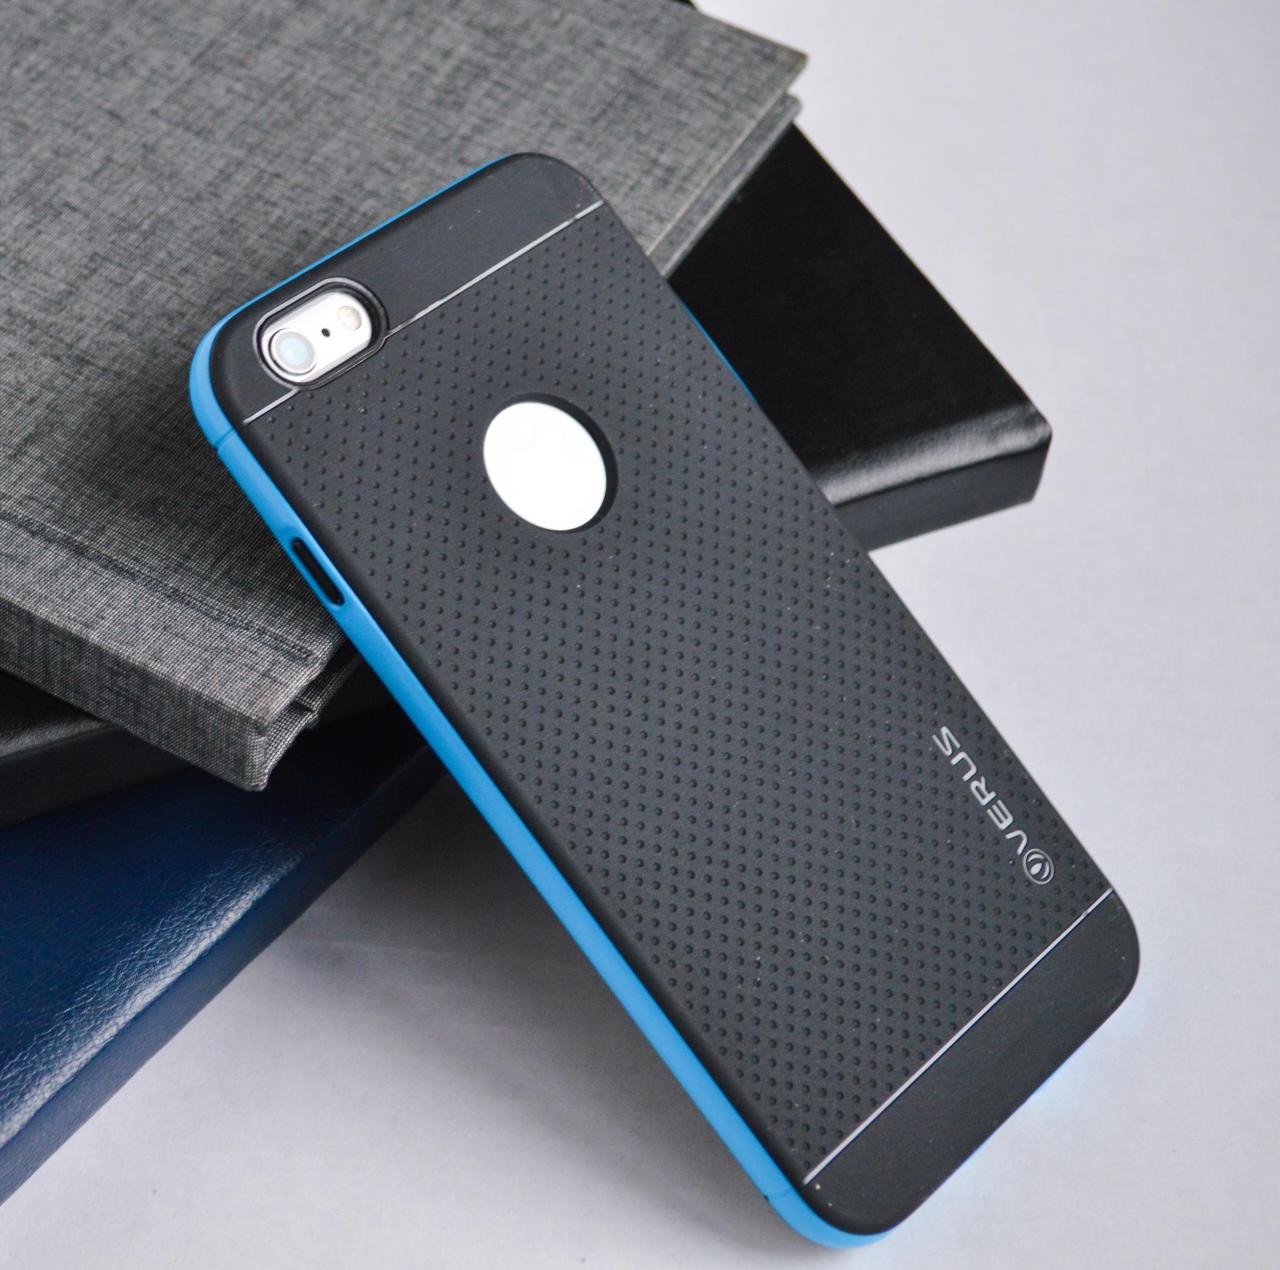 Blue Colorful Bumper With Black Tpu Cover High Quality Case For Iphone 6 Iphone 6 Plus 4.7" 5.5"